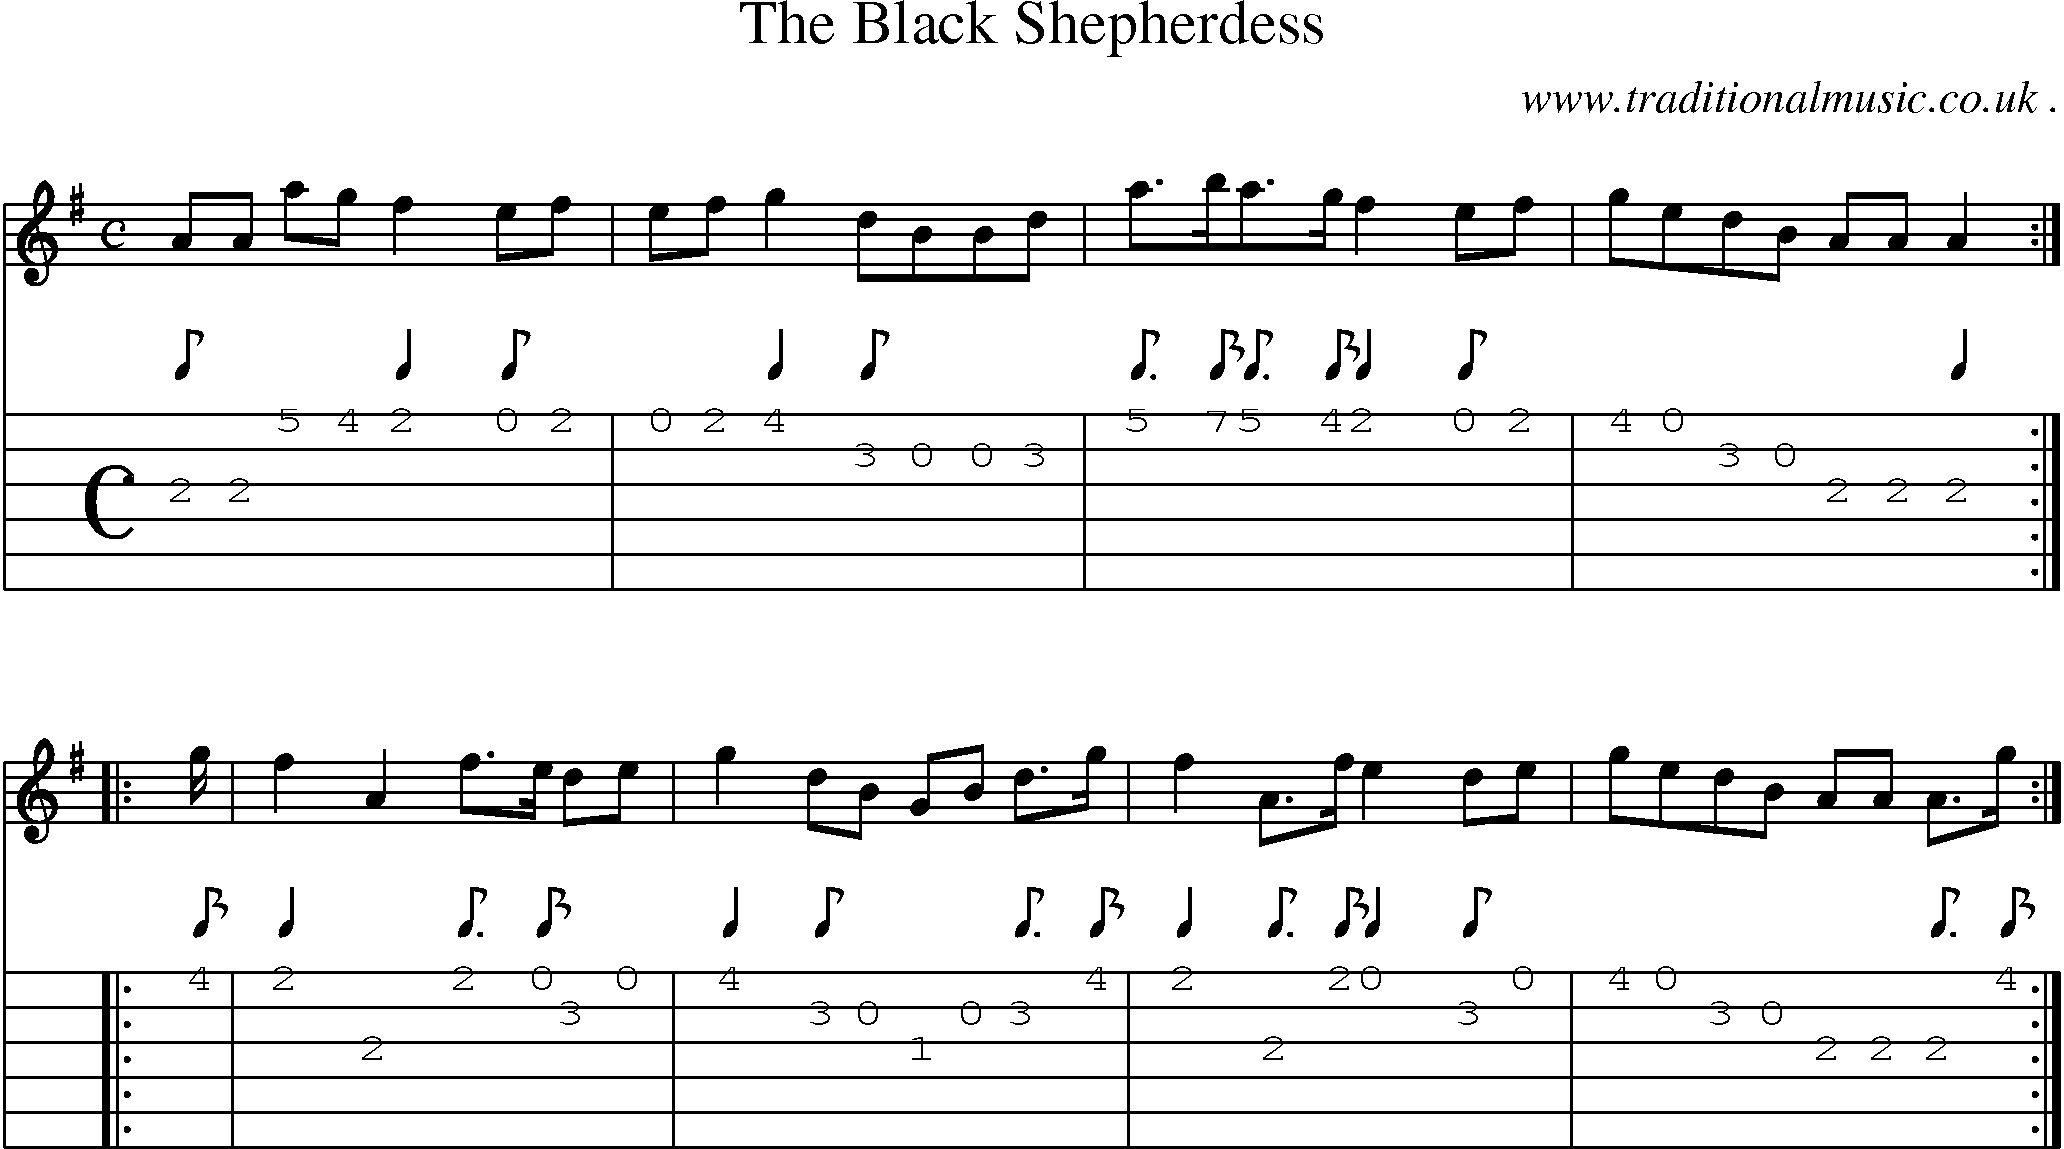 Sheet-music  score, Chords and Guitar Tabs for The Black Shepherdess